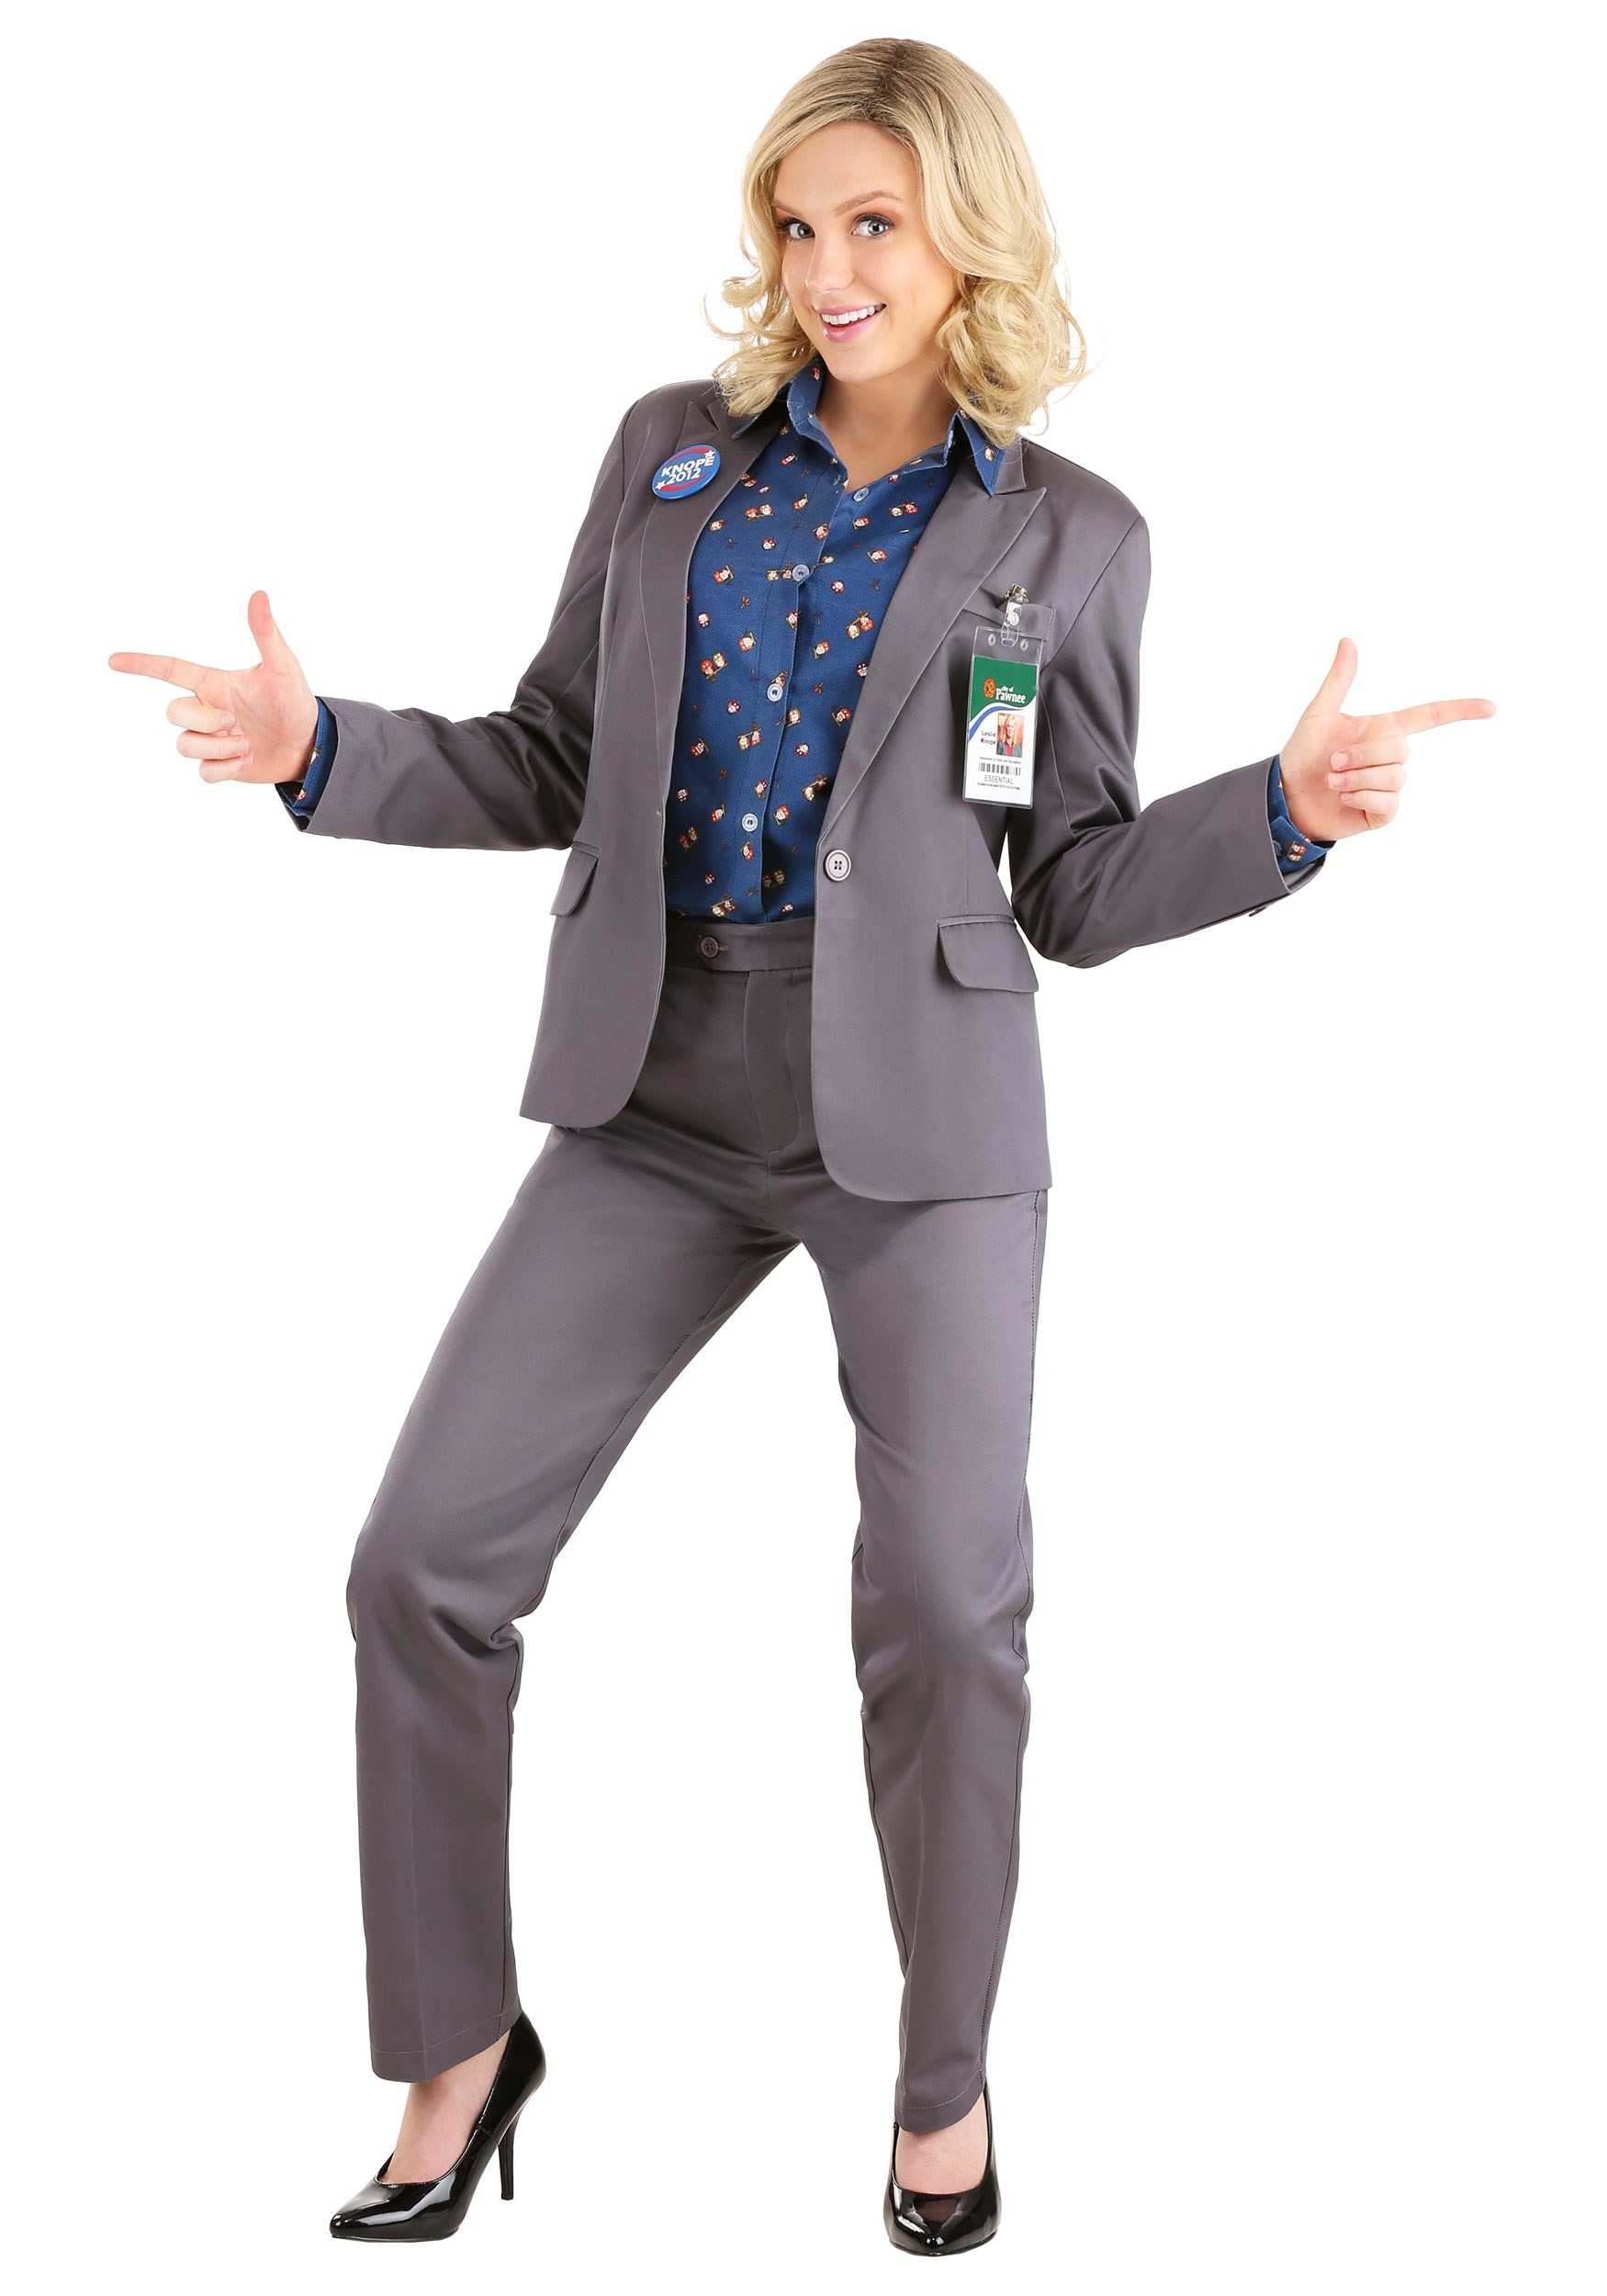 Leslie Knope Parks and recreation Novelty ID Badge Prop Costume.